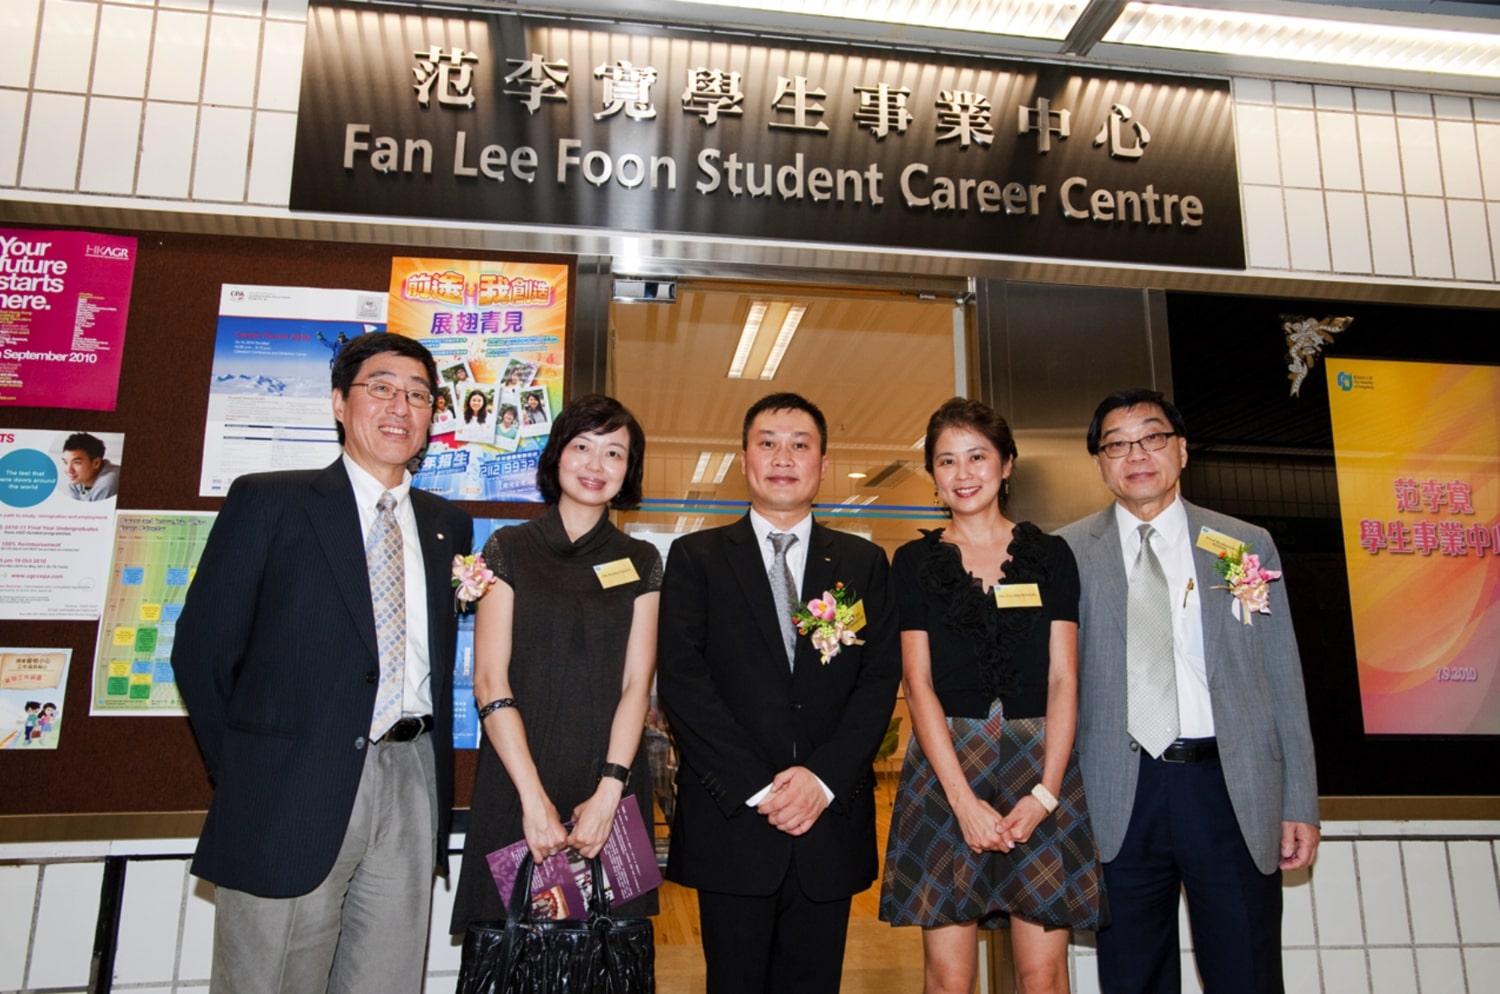 The Fan Lee Foon Student Career Centre, named after Andrew Fan's late grandmother in 2010